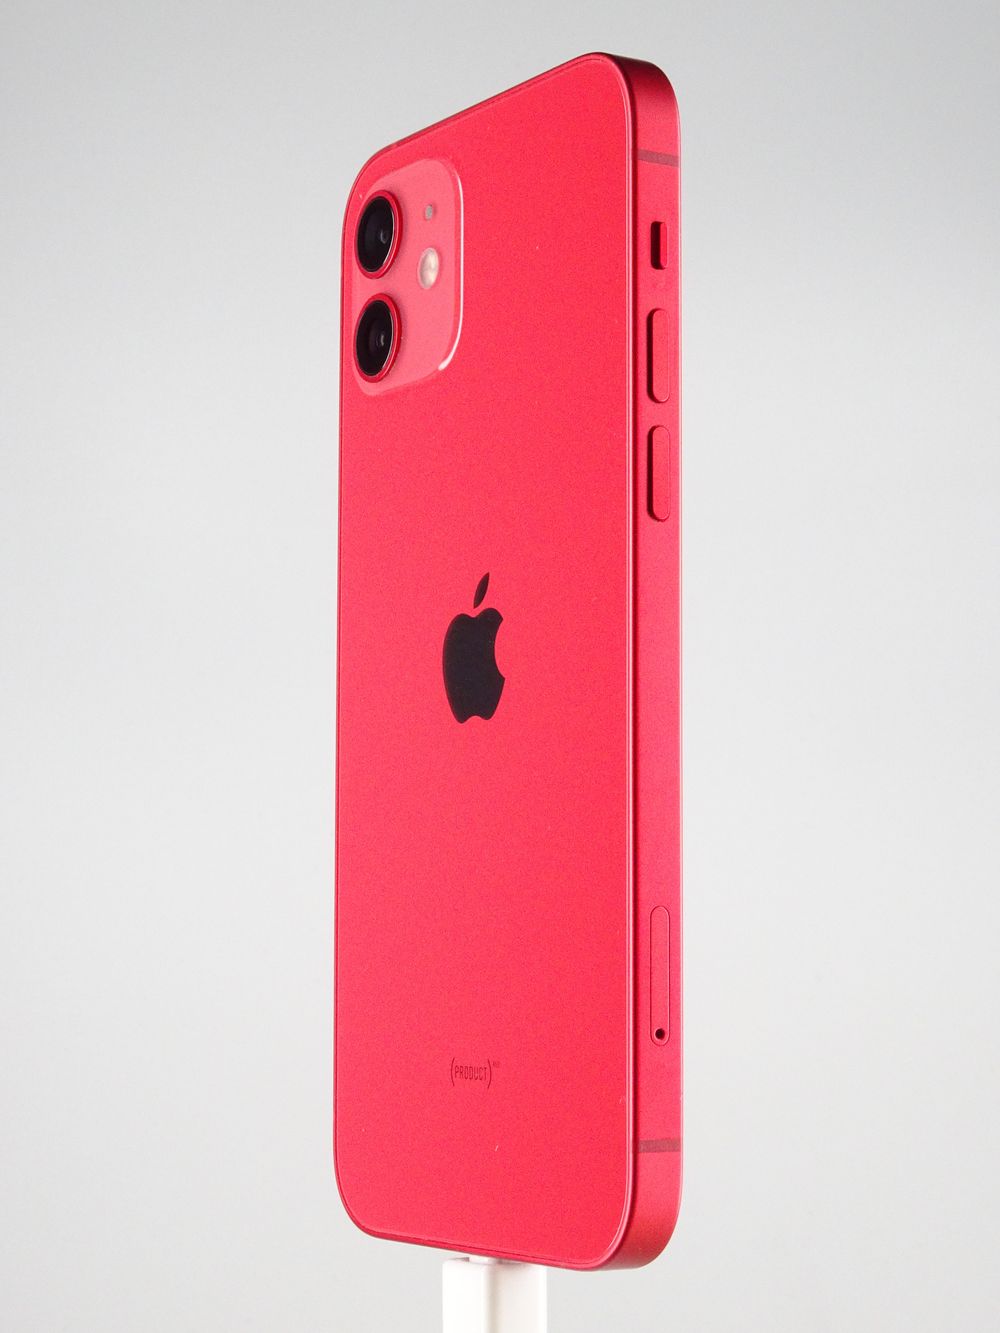 Telefon mobil Apple iPhone 12, Red, 256 GB,  Excelent